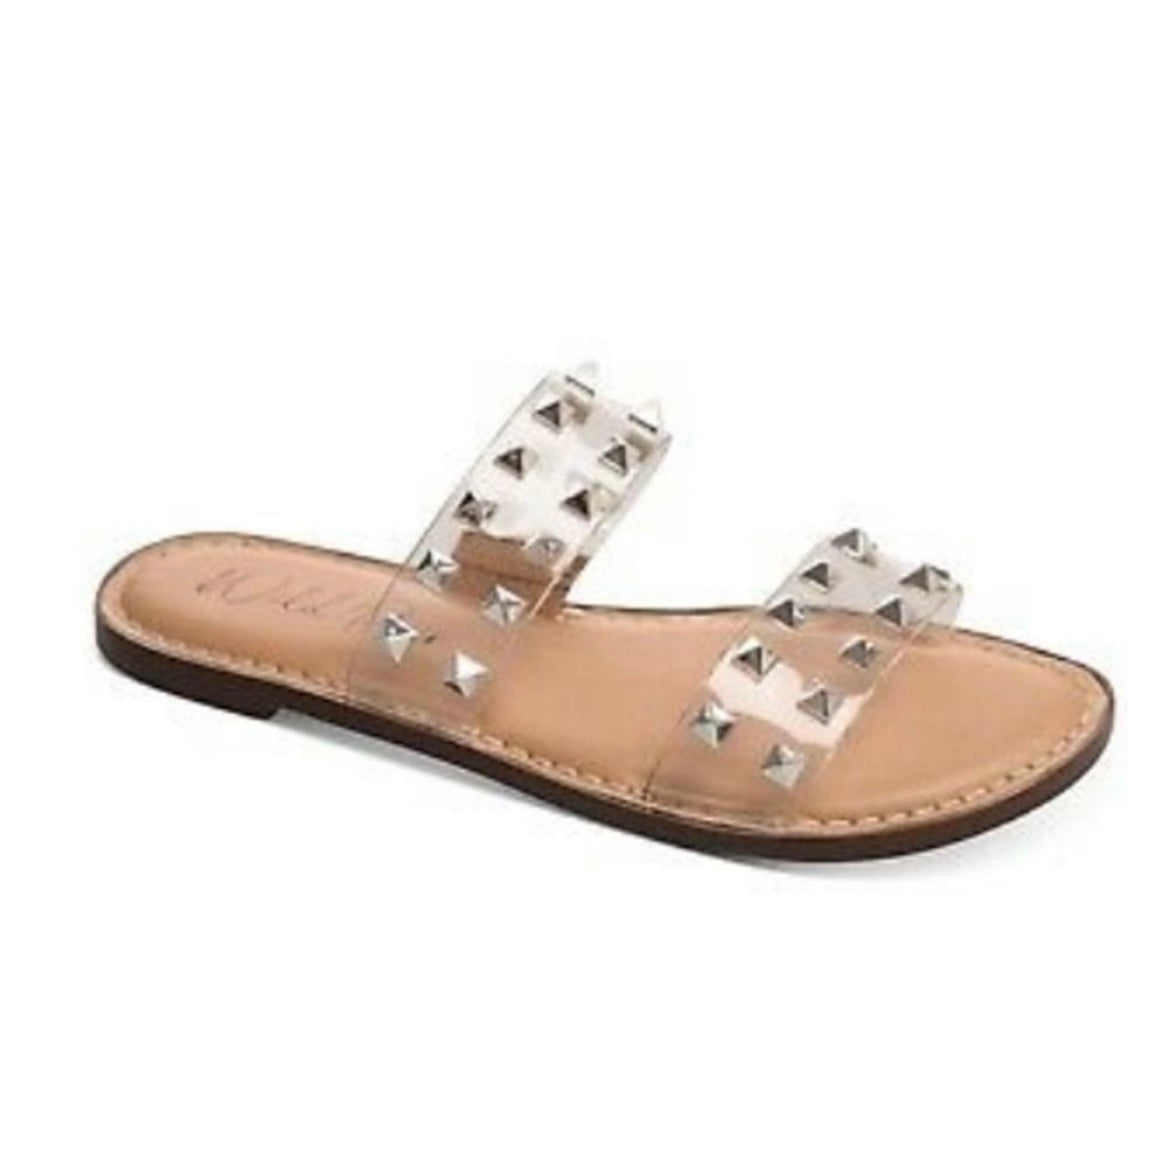 GINNIEV Double Band Slide Flats Silver Stud Size 9 Women's Sandals